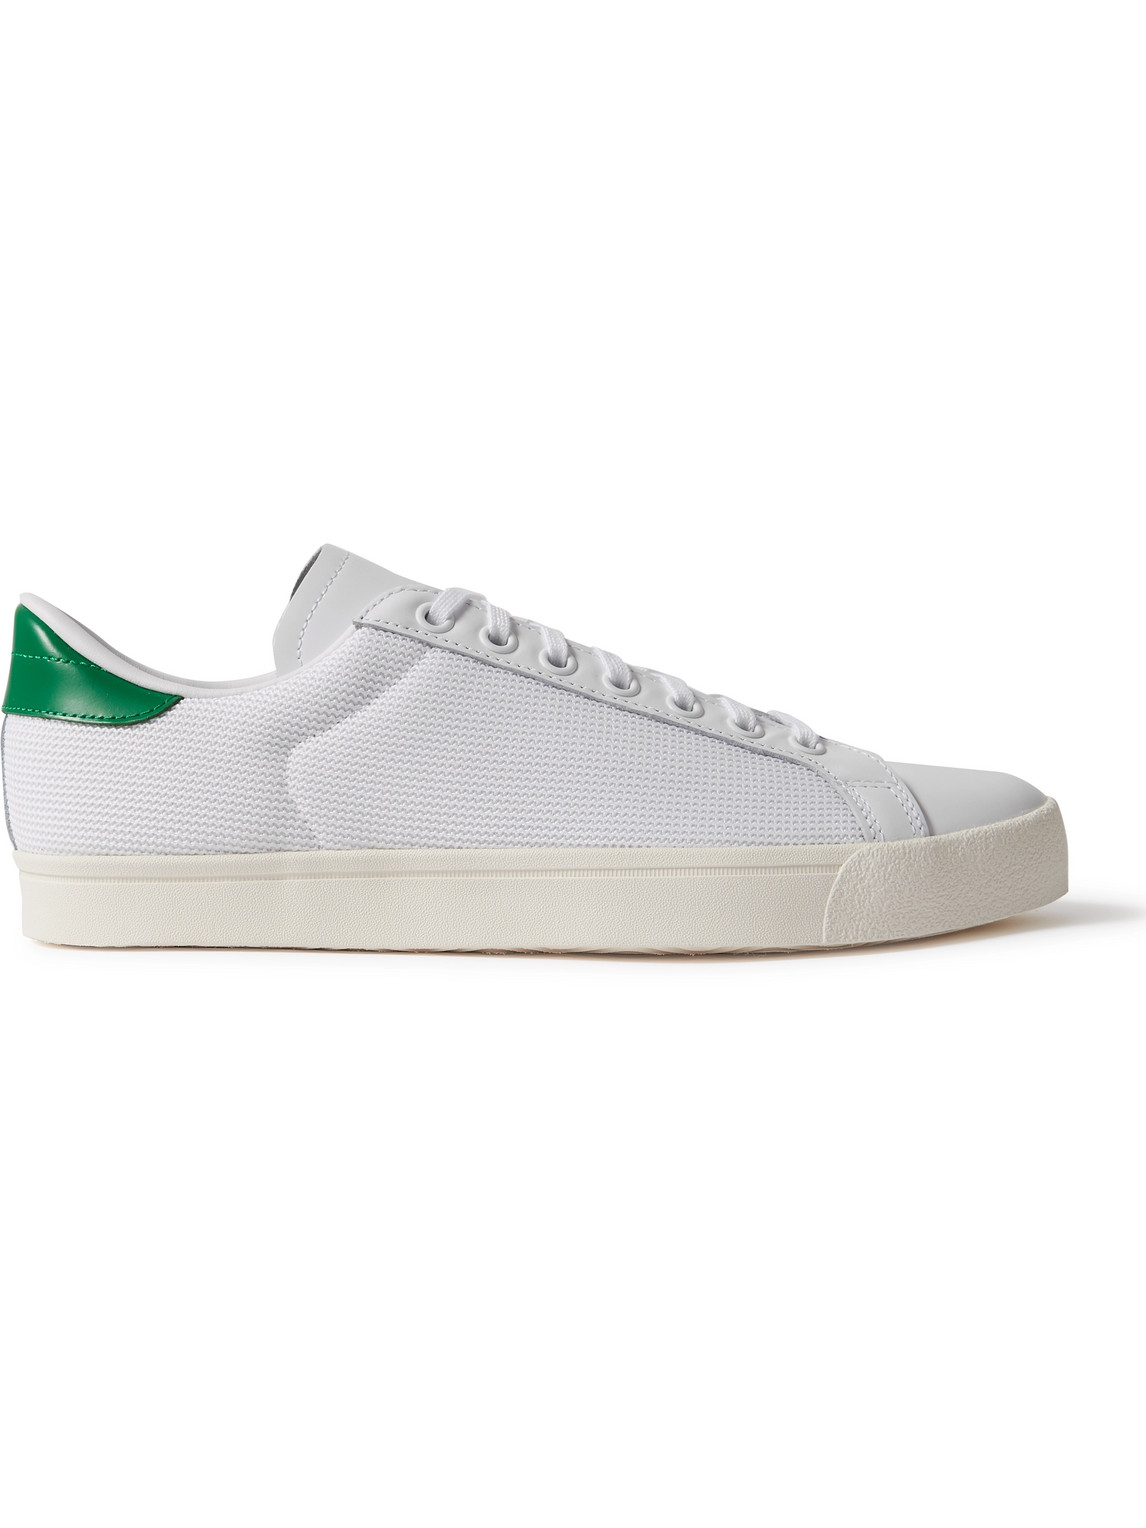 ADIDAS ORIGINALS ROD LAVER MESH AND LEATHER SNEAKERS